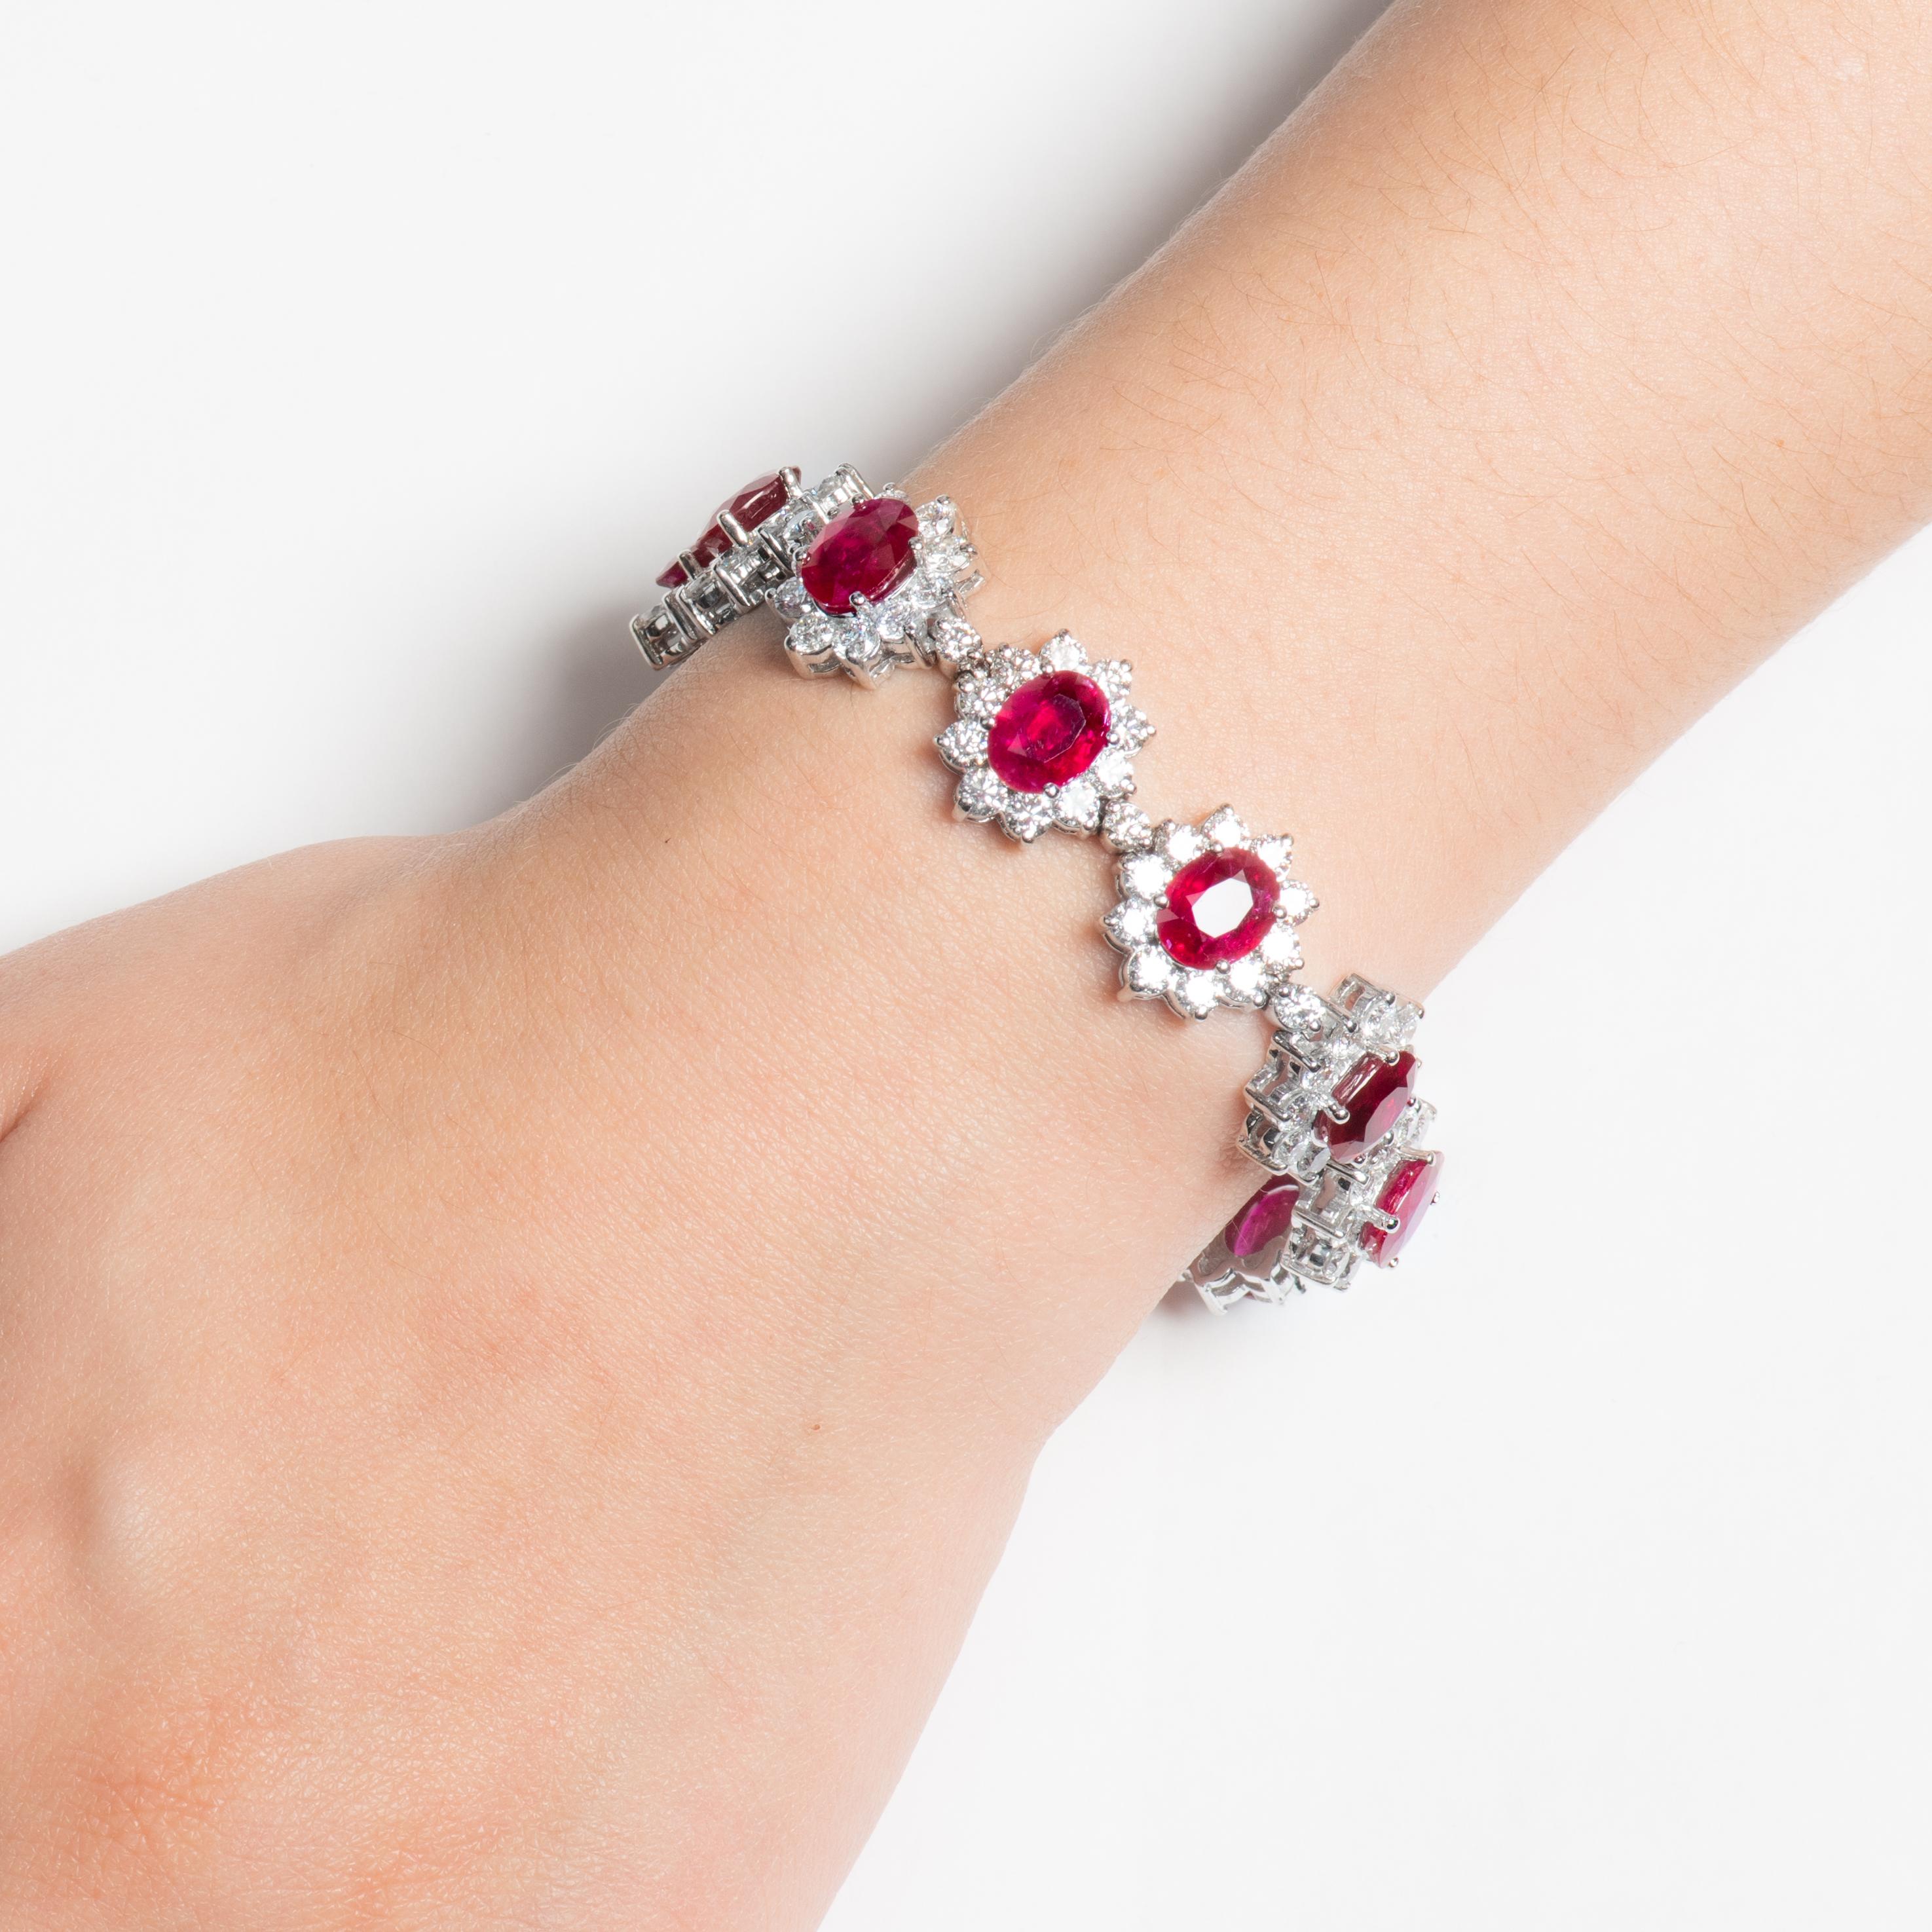 This exquisite bracelet features 11 fine, rich, intensely red oval rubies with a total weight of 23.45ct. The rubies have a medium saturation, and are very lively and bright, beautifully matched to each other. They are surrounded  by round diamond